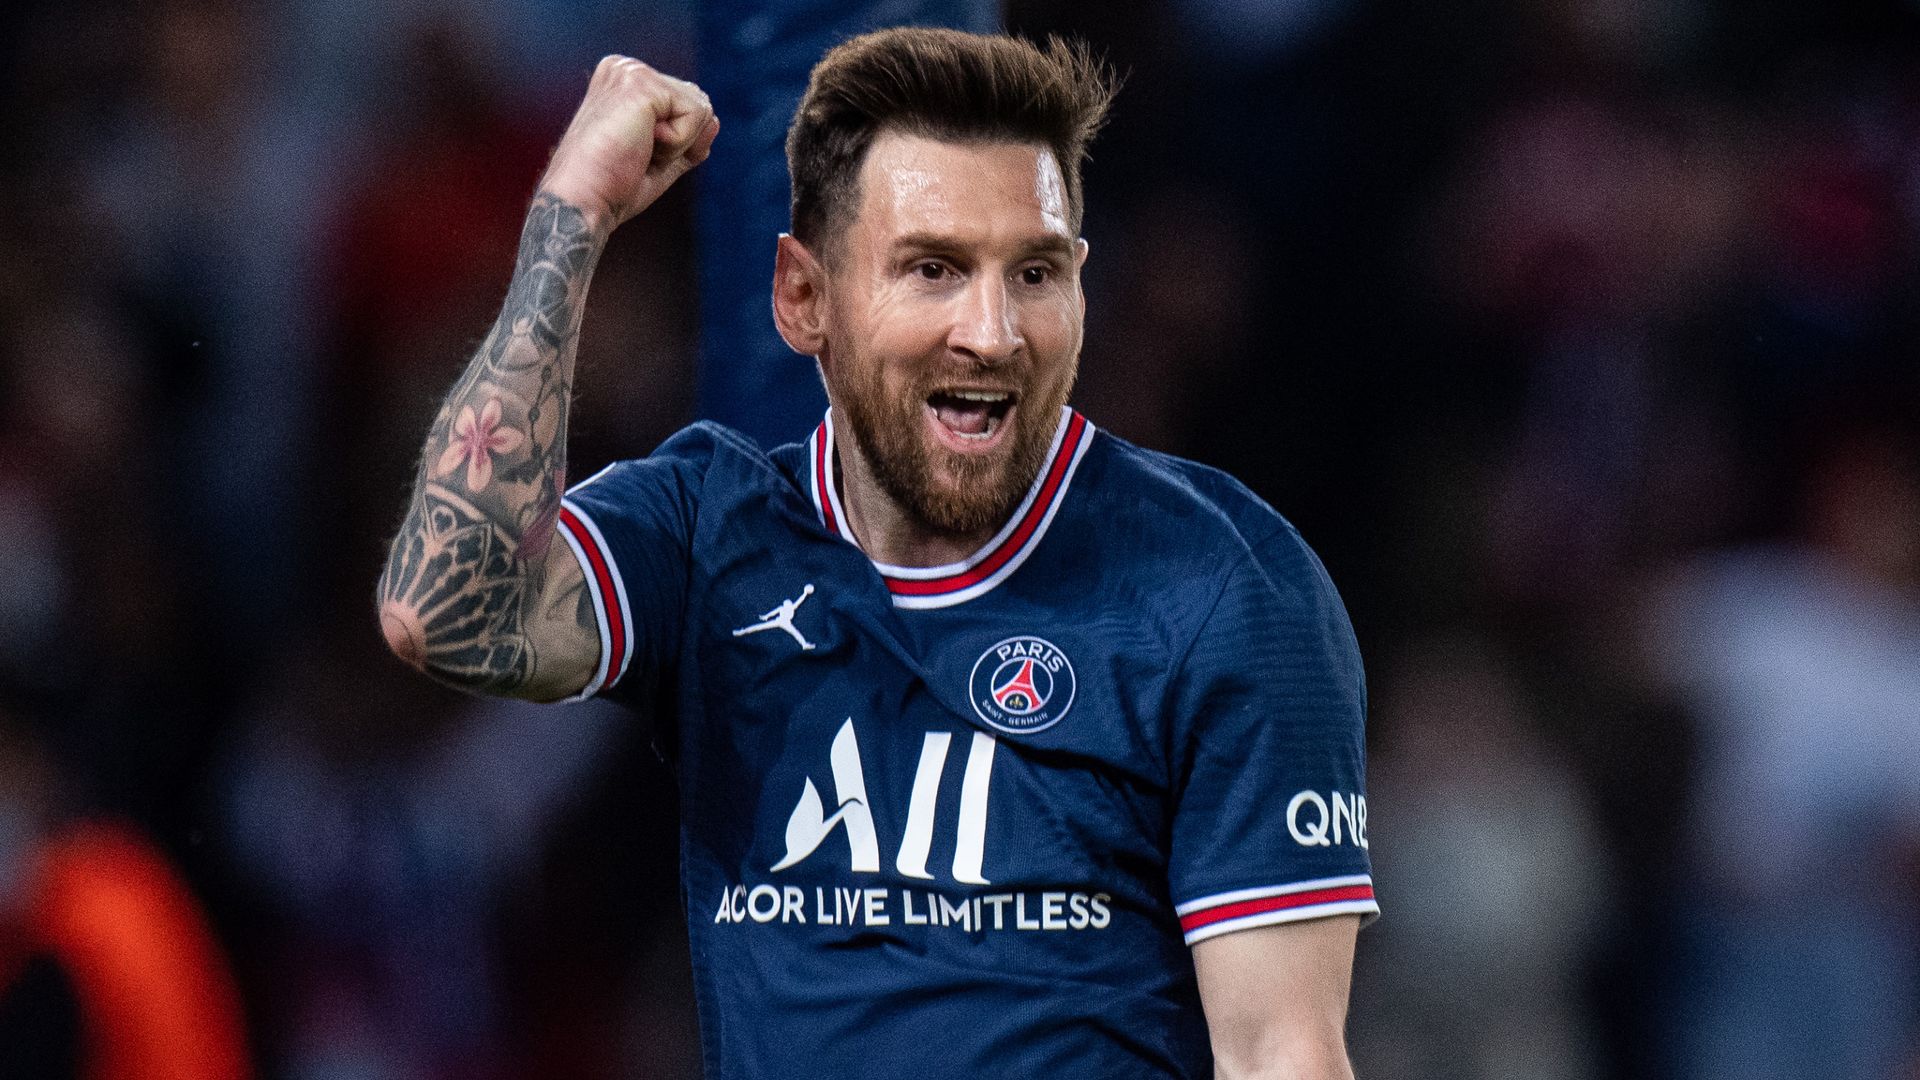 CL round-up: Messi double rescues PSG